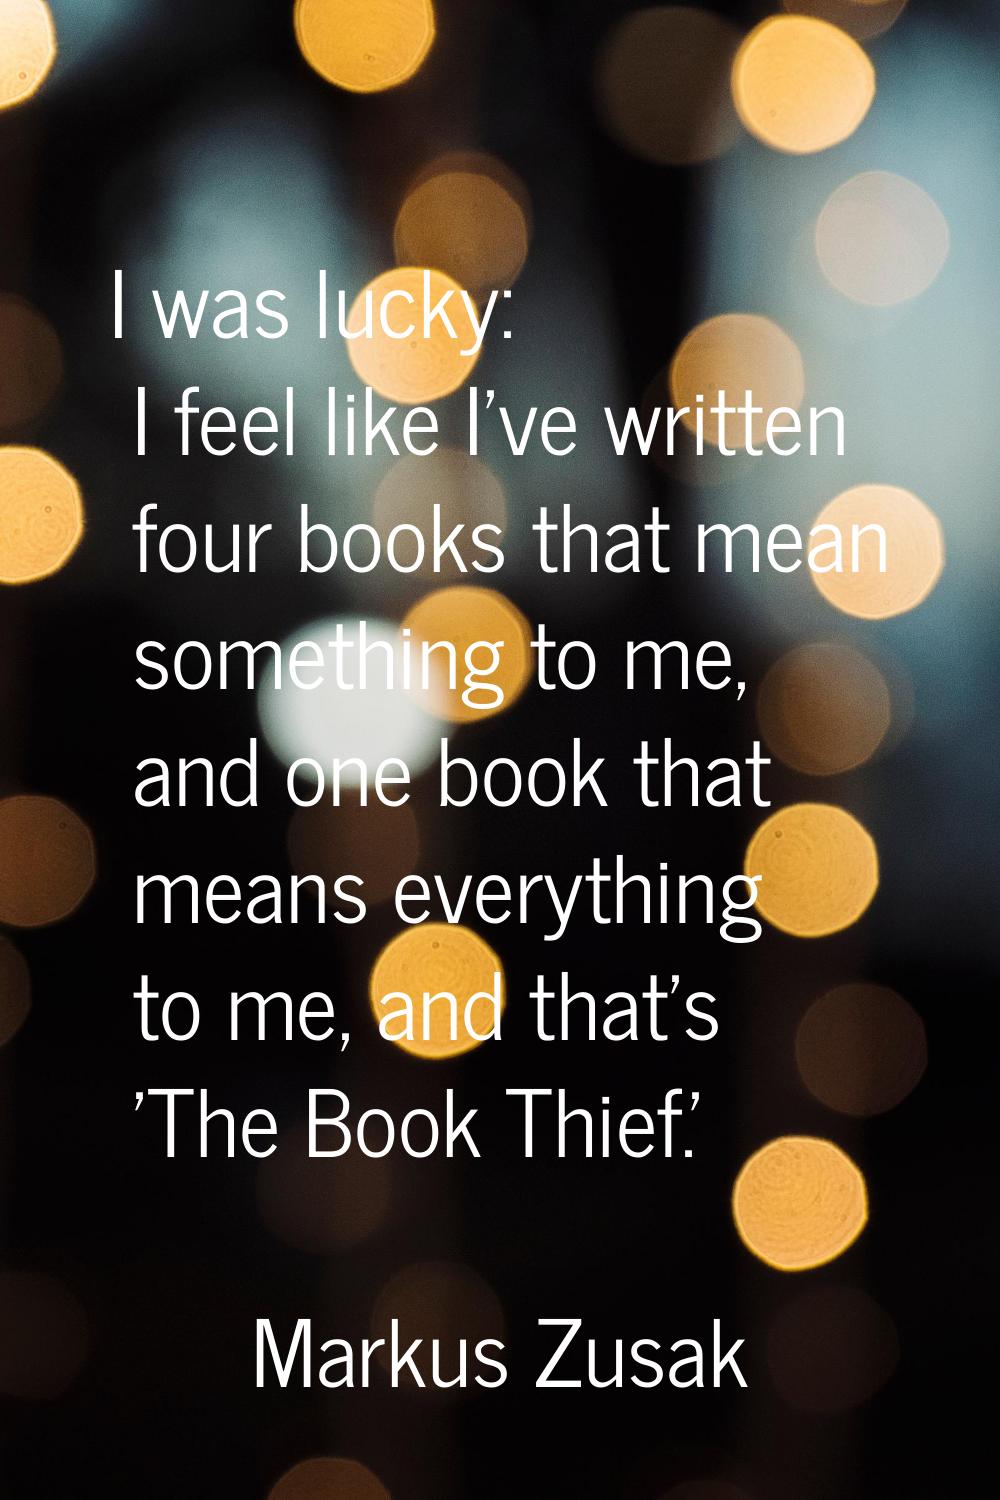 I was lucky: I feel like I've written four books that mean something to me, and one book that means